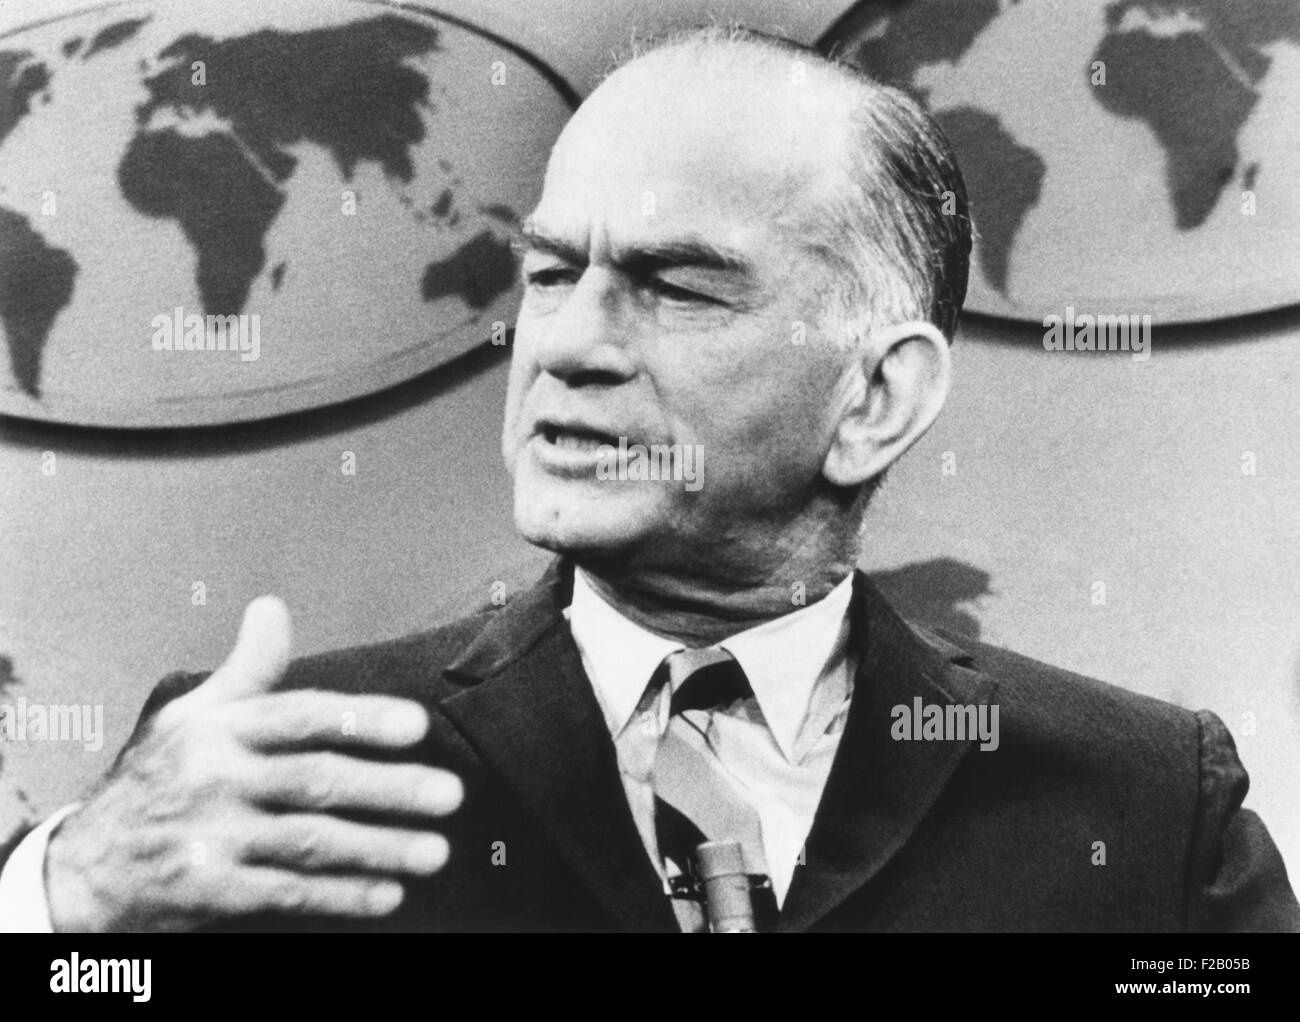 Sen. J. William Fulbright was Chrm. of the Foreign Relations Committee from 1959 to 1974. He was the first major politician to oppose the Vietnam War with his 1966 book, 'The Arrogance of Power.' Photo shows Fulbright on ABC-TV's 'Issues and Answers' program, June 22, 1969. (CSU 2015 9 699) Stock Photo